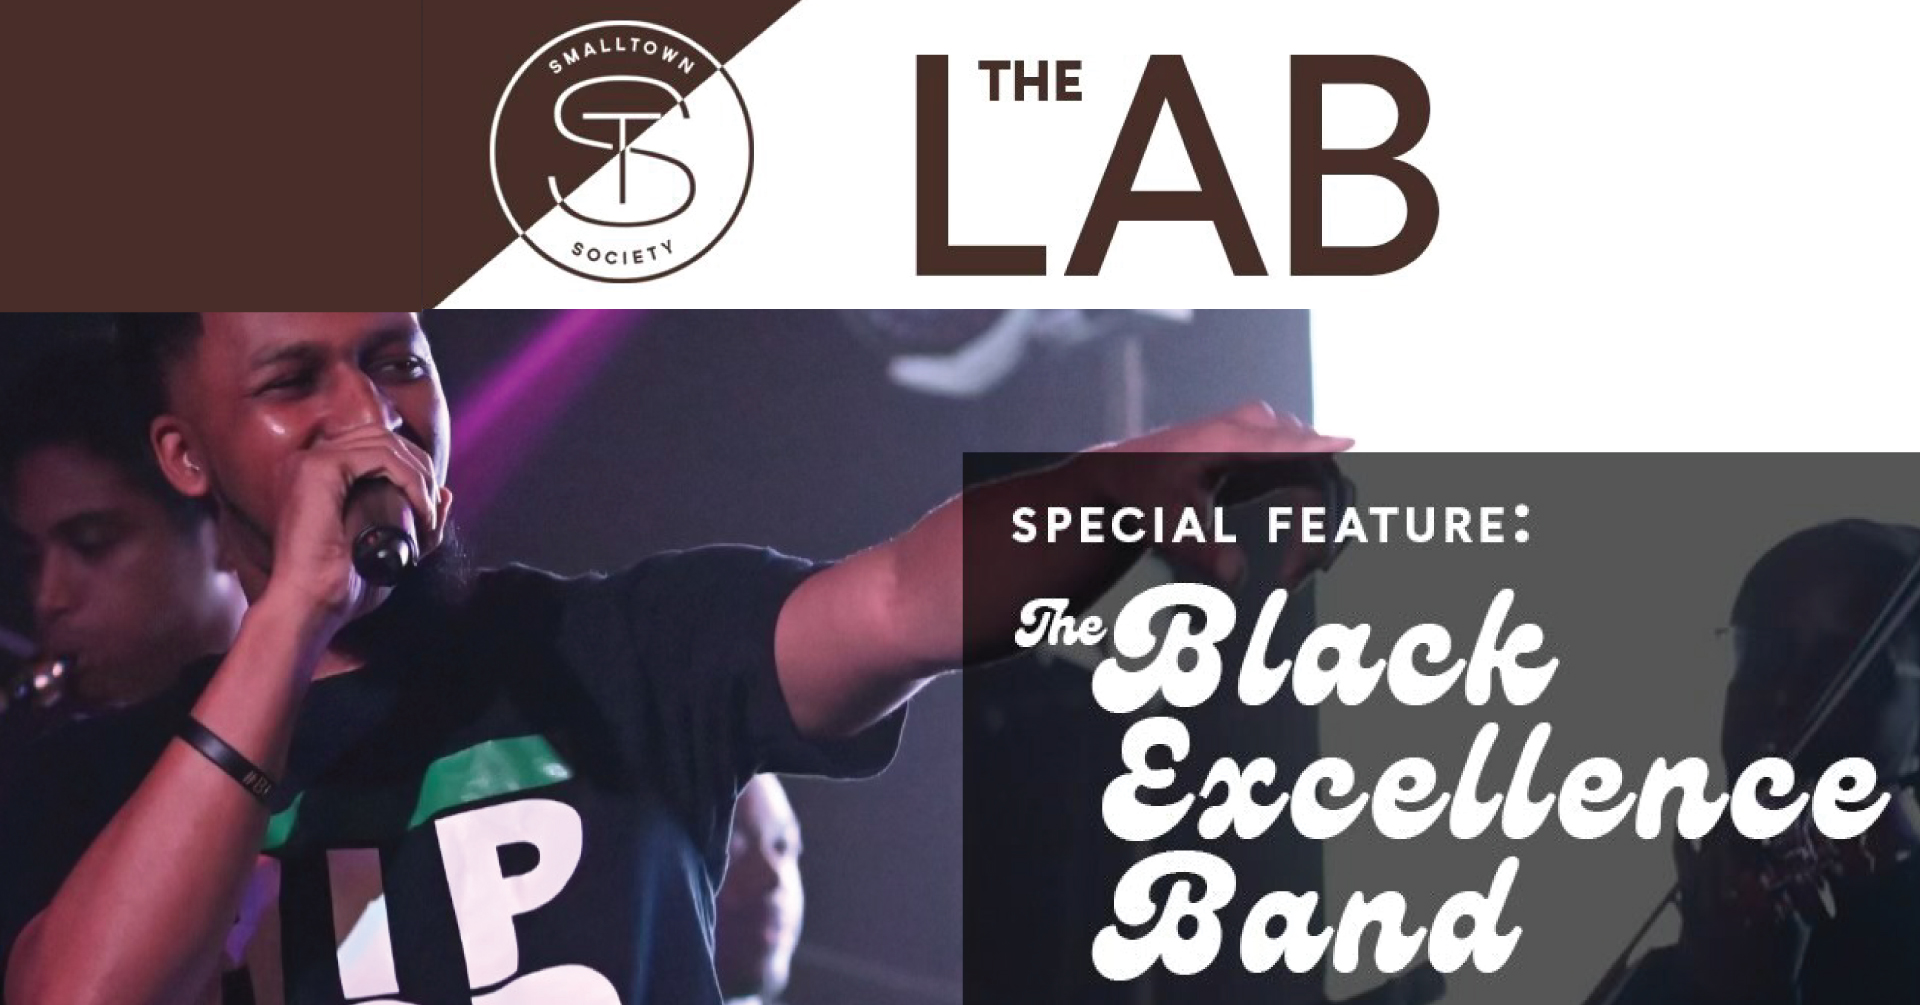 Smalltown Society Lab Black Excellence Band Event